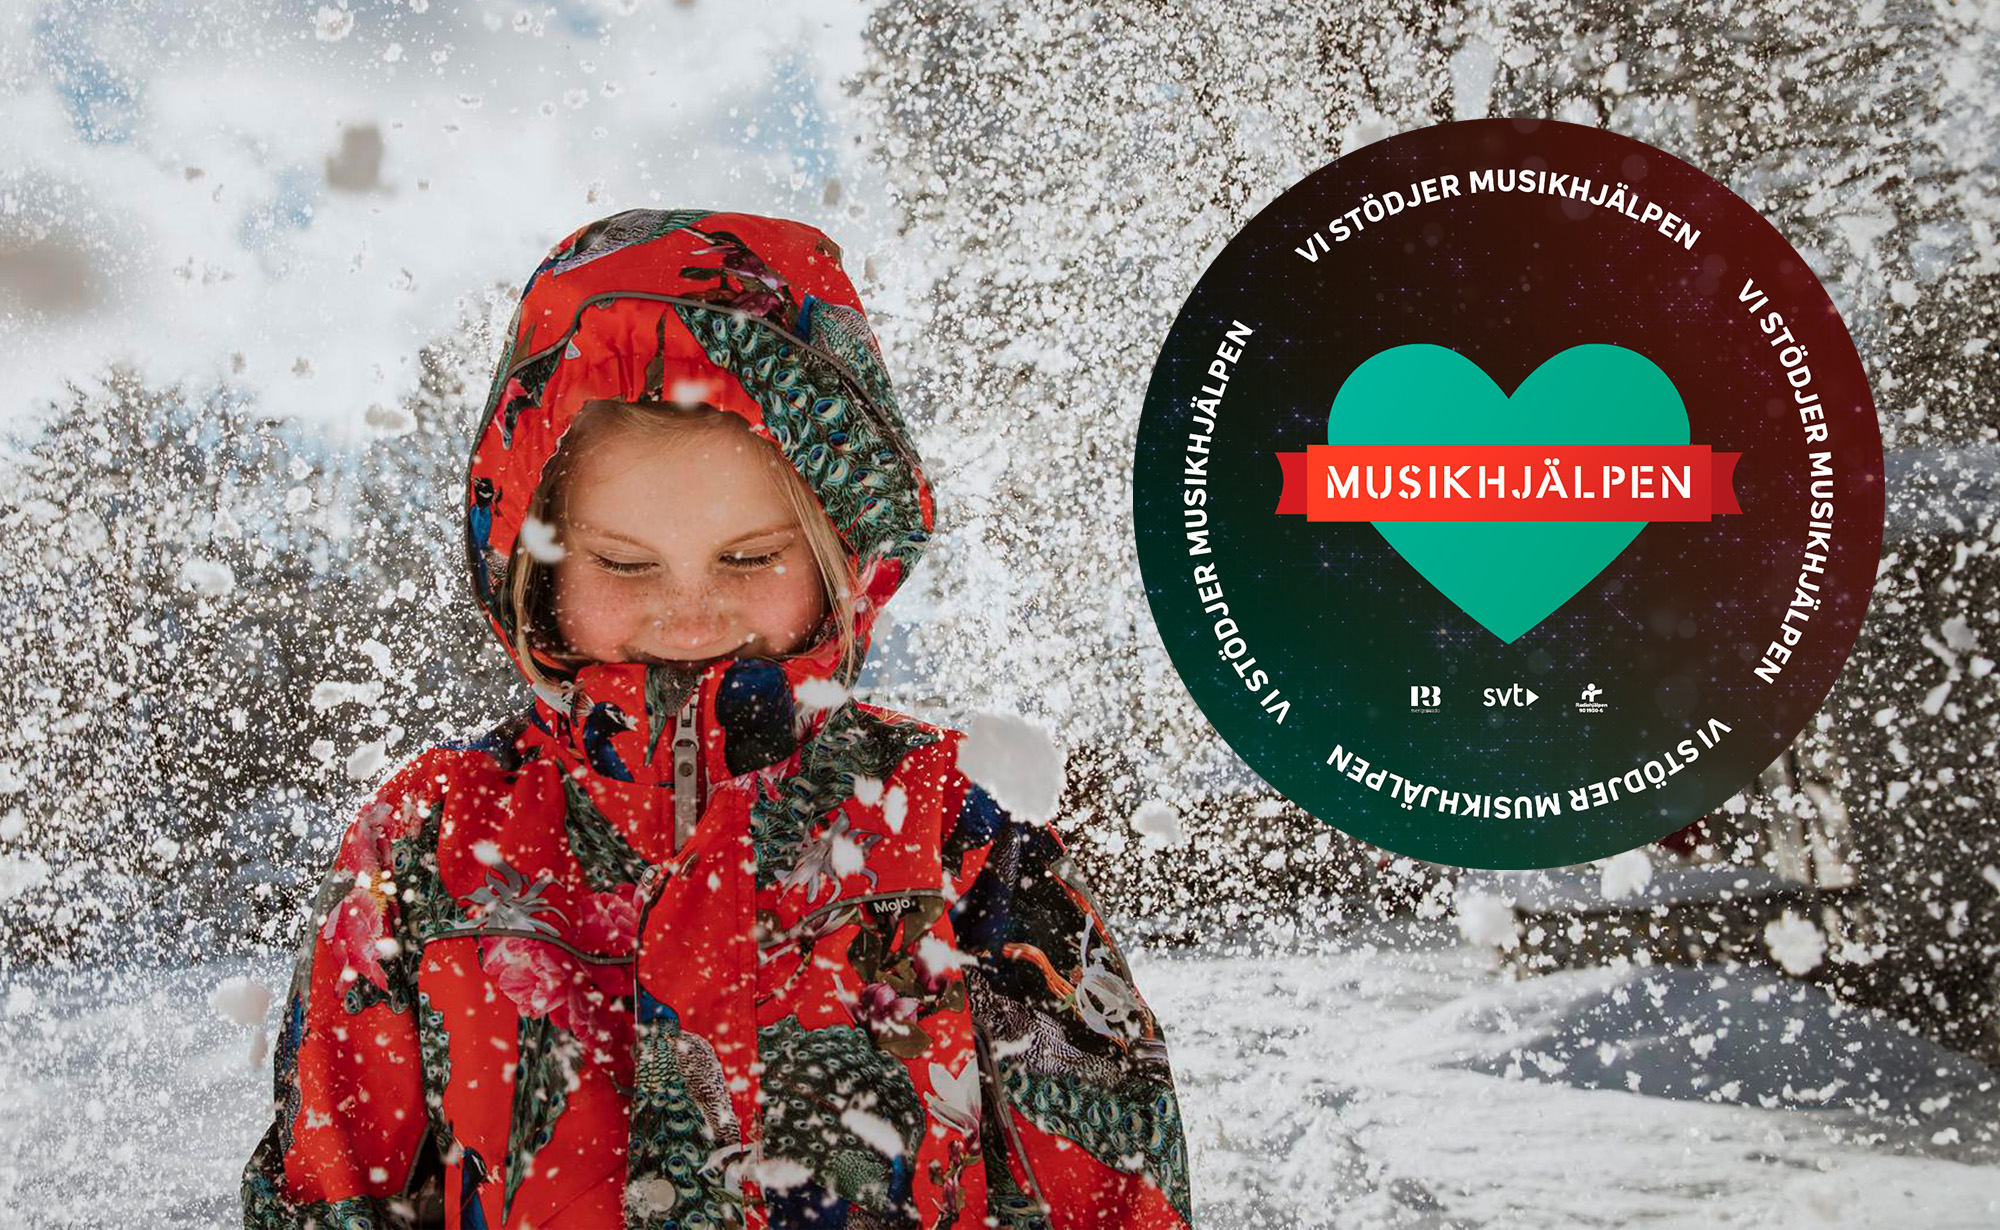 Child in snow, outdoors and added Musikhjälpen logo